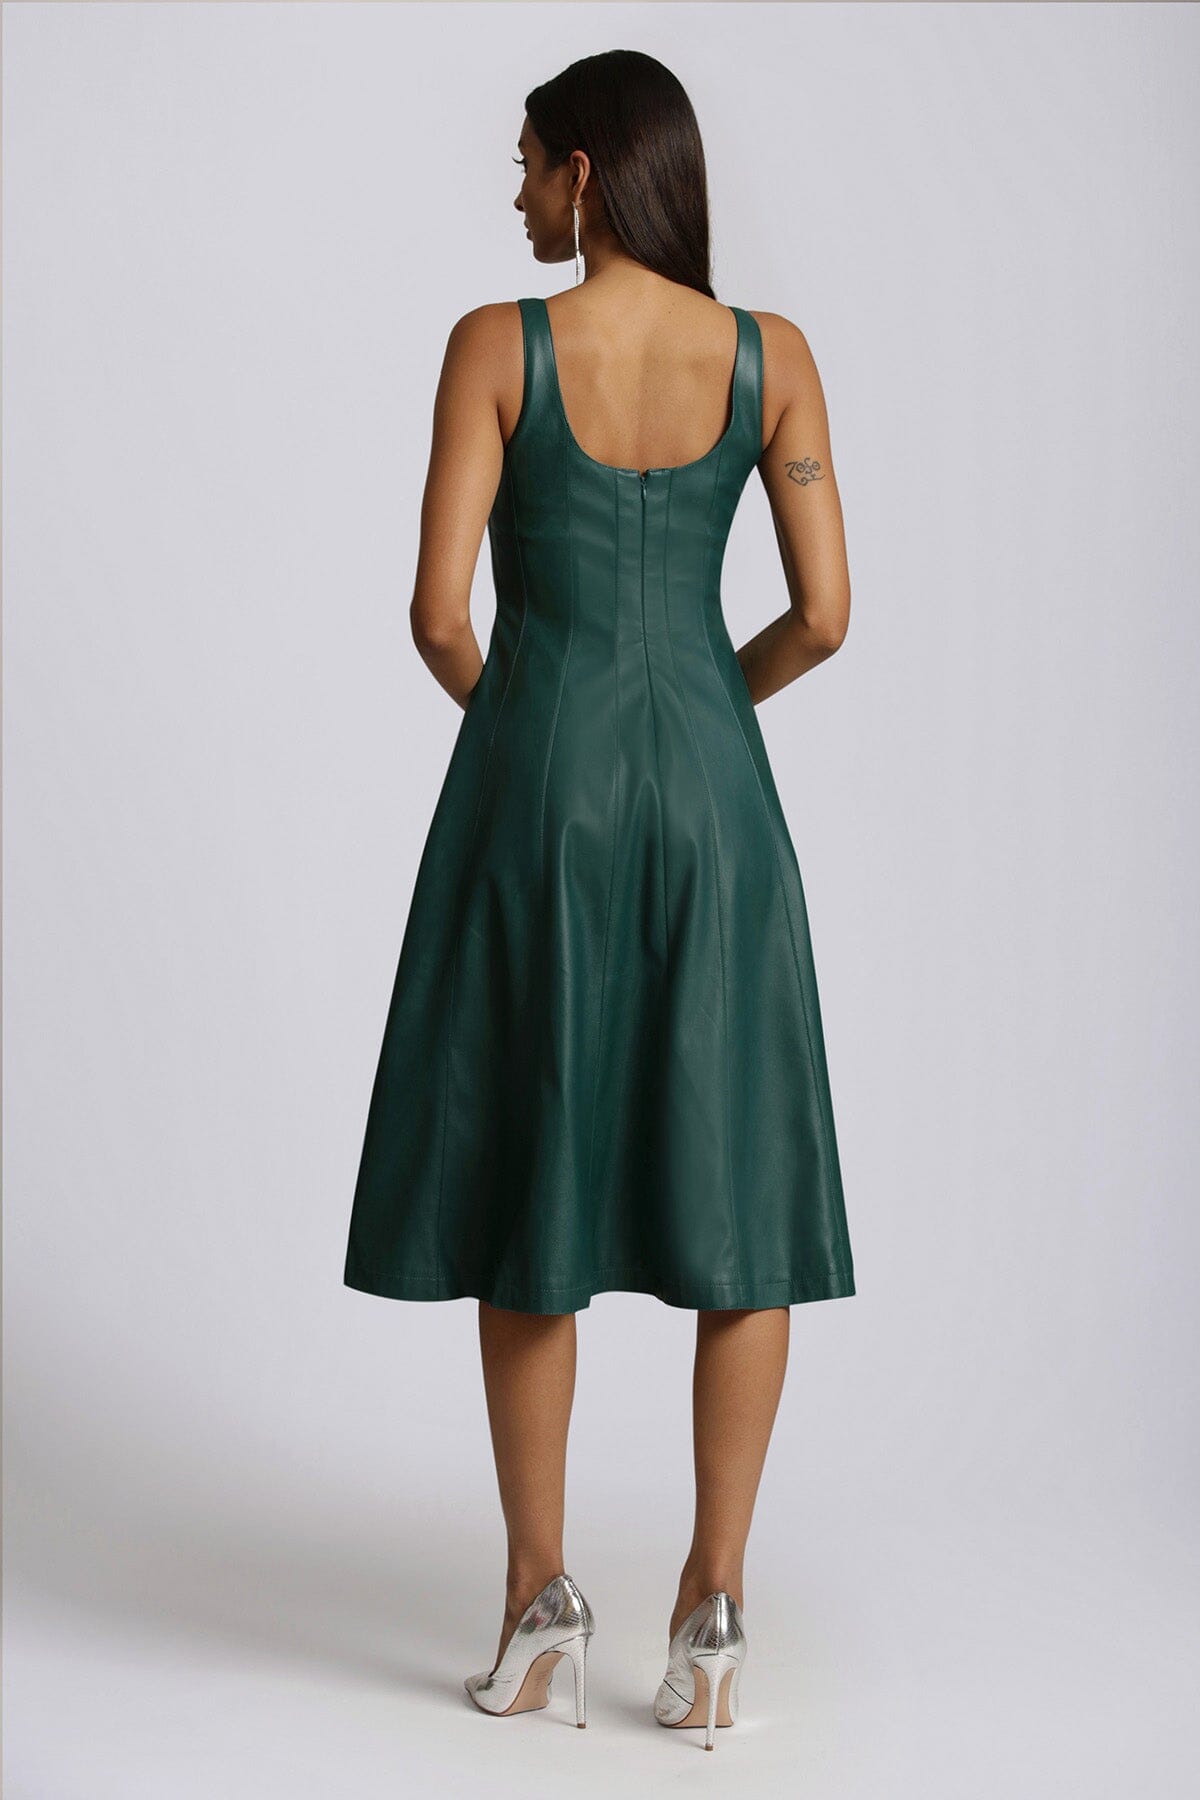 faux ever leather fit and flare midi dress pine green - figure flattering designer fashion semi-formal dresses for women